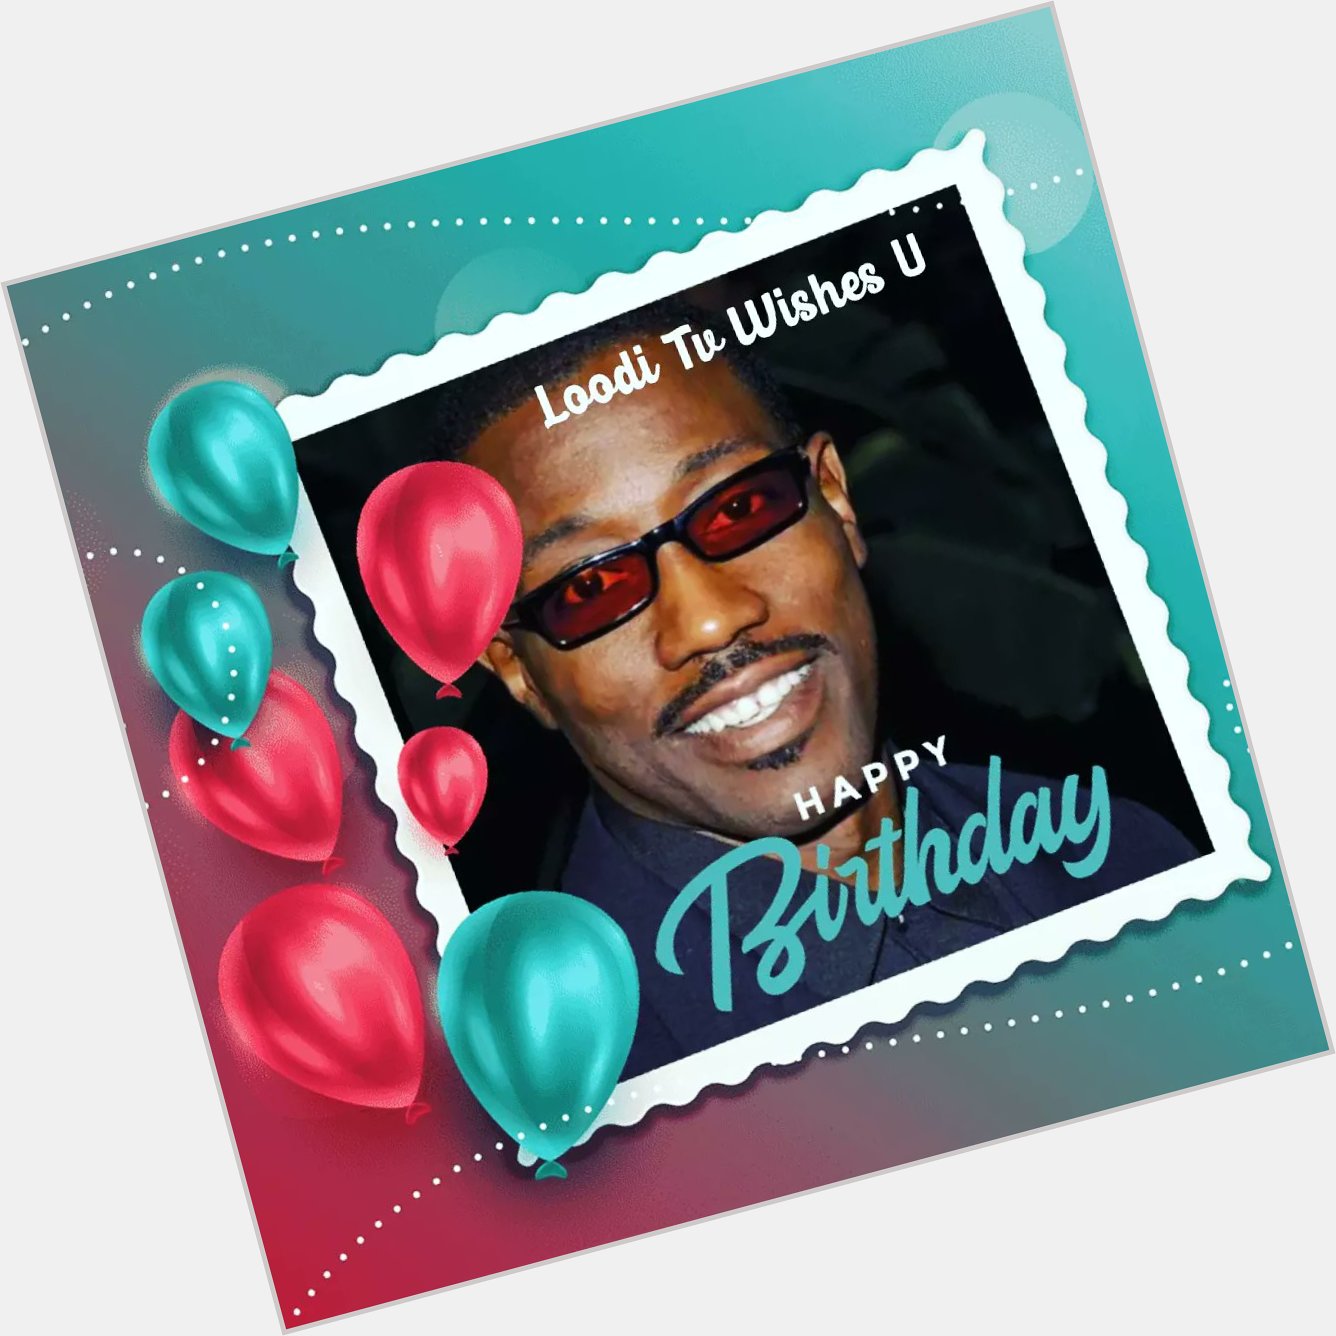 Happy birthday to you Wesley Snipes and This little angel. 31st July 